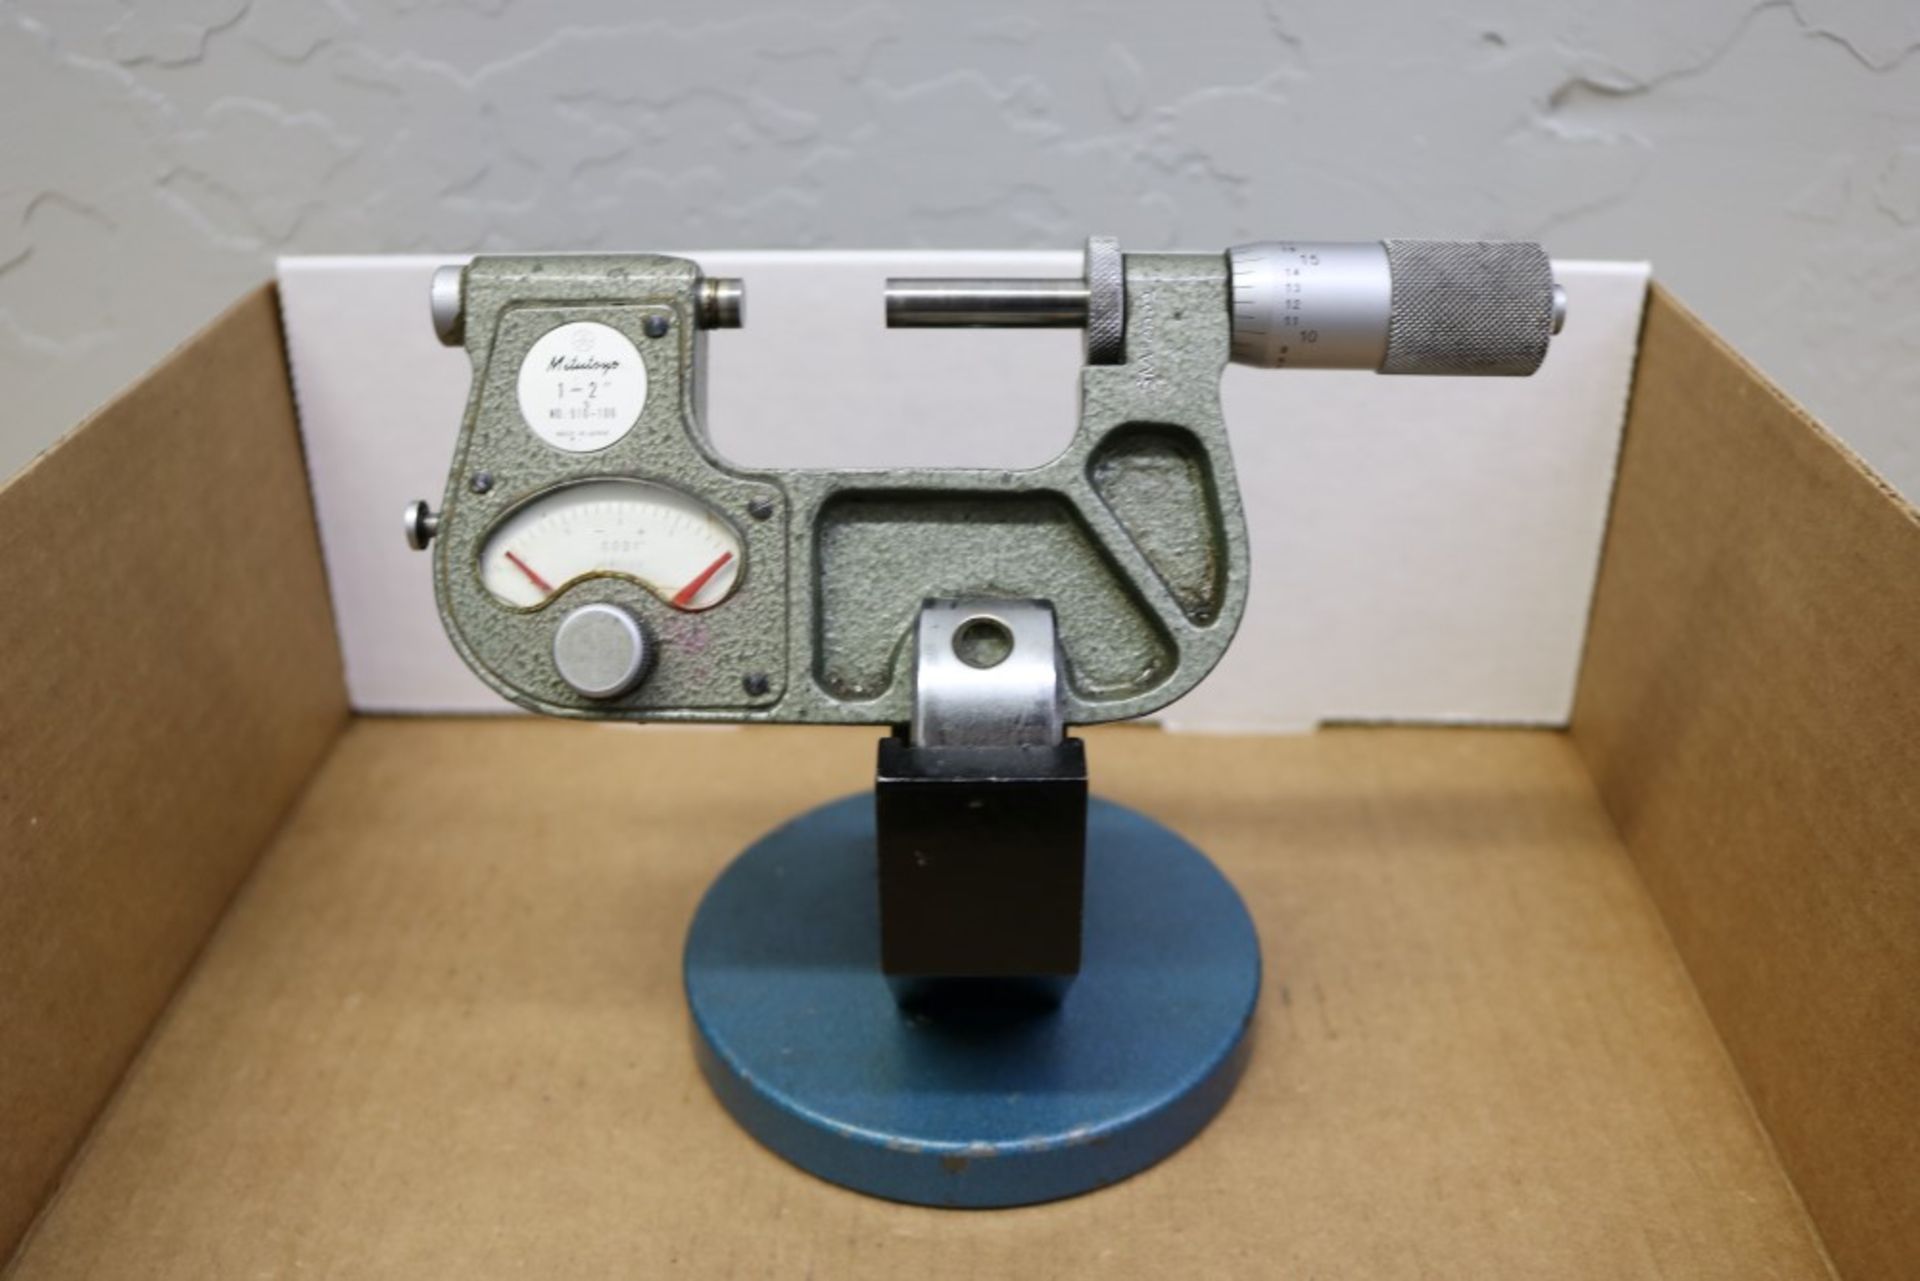 Mitutoyo OD Indicating Micrometer with Stand 0-1", Mitutoyo OD Indicating Micrometer with Stand - Image 2 of 6